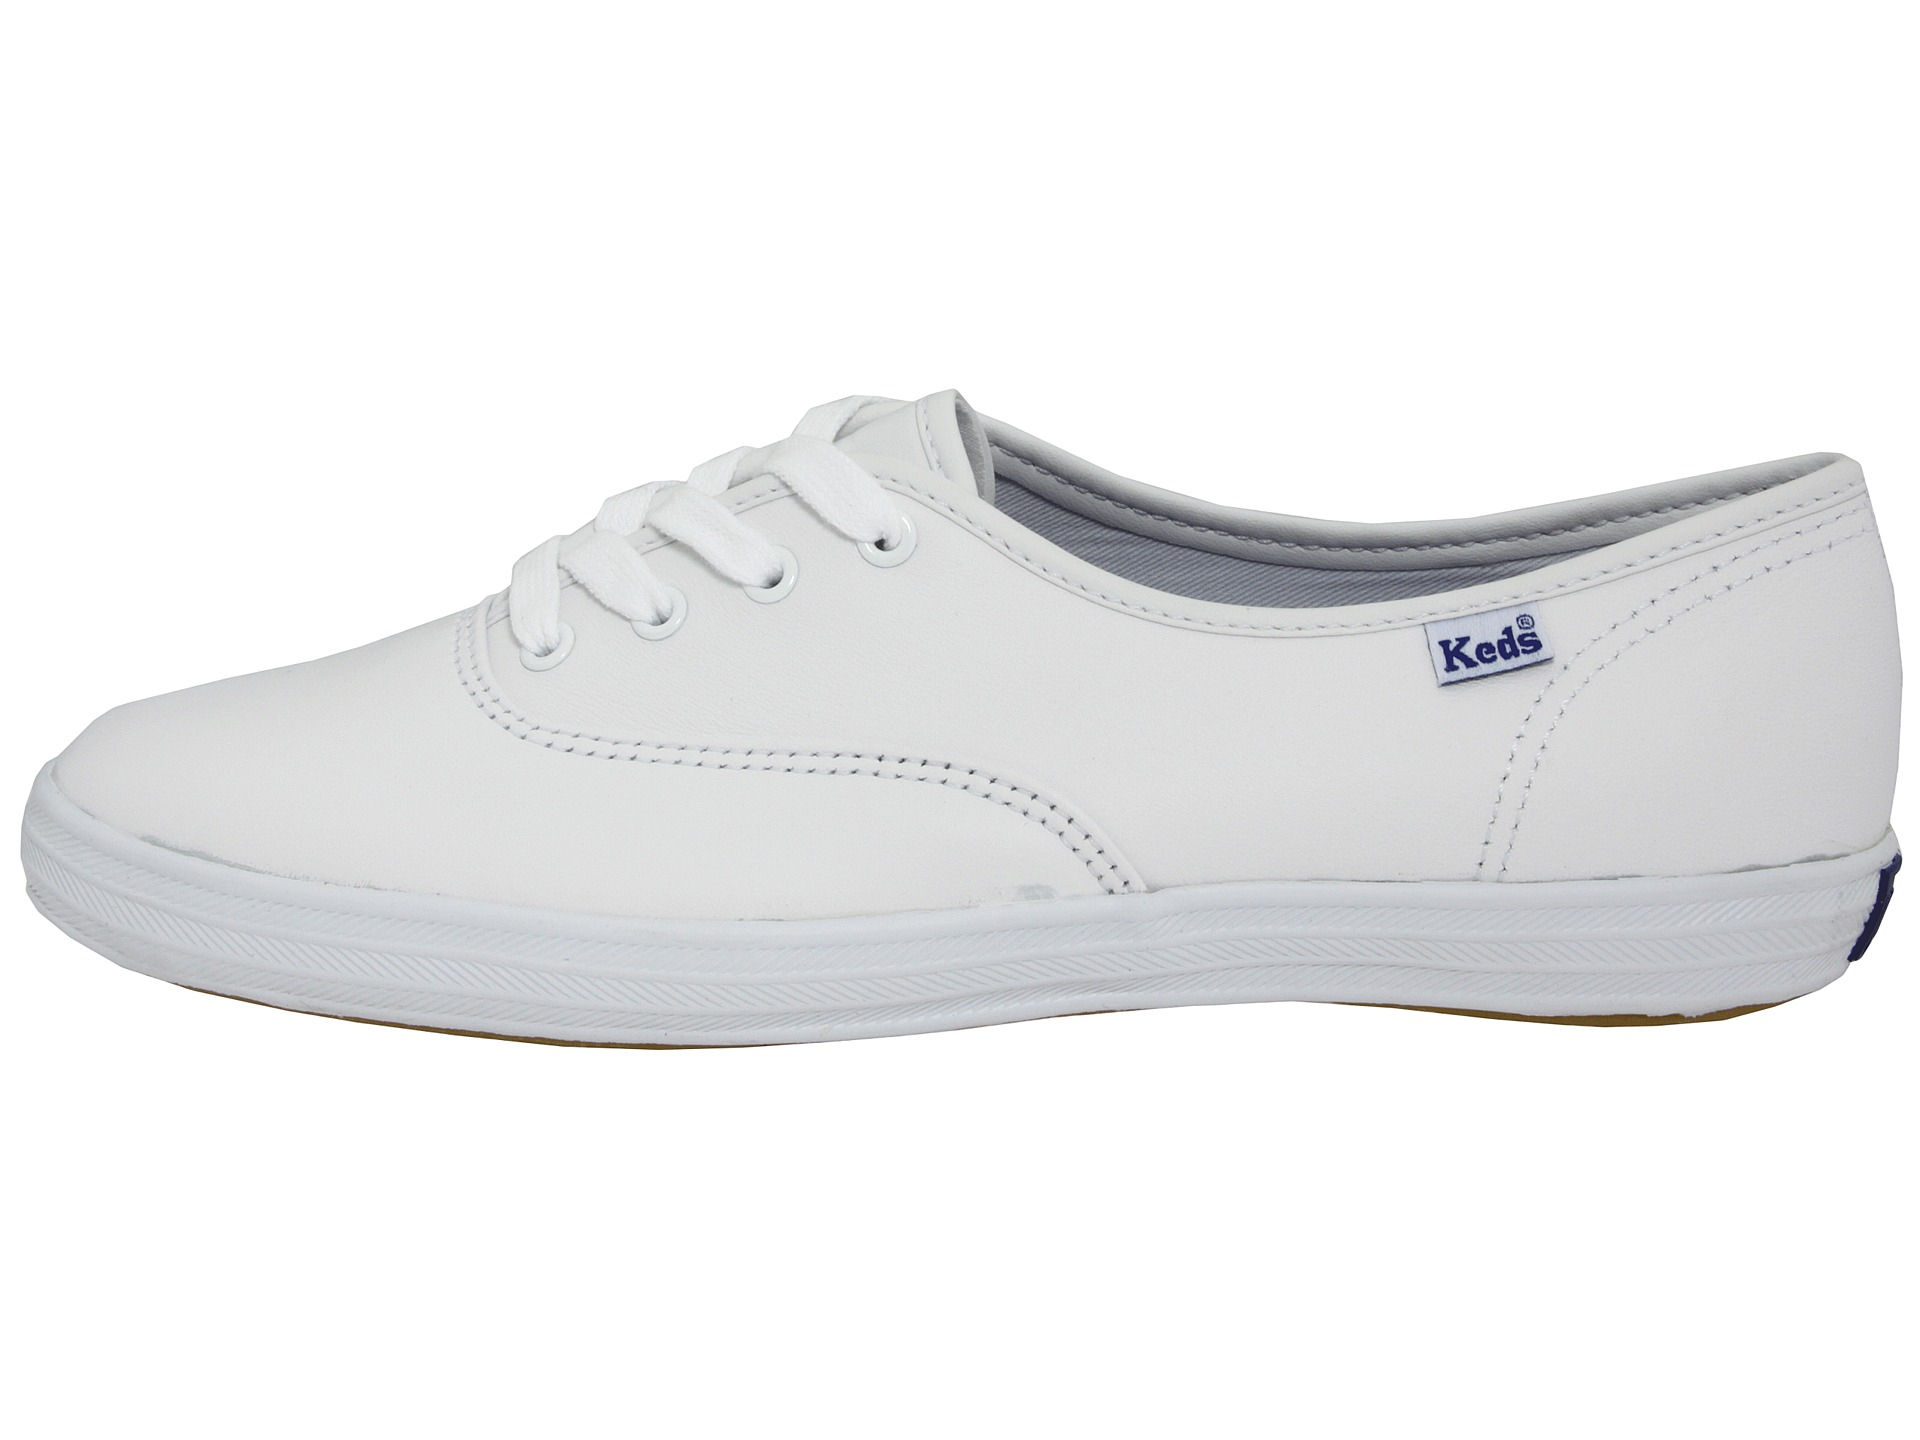 Keds White Champion Leather Cvo Product 1 20192808 1 802180199 Normal 